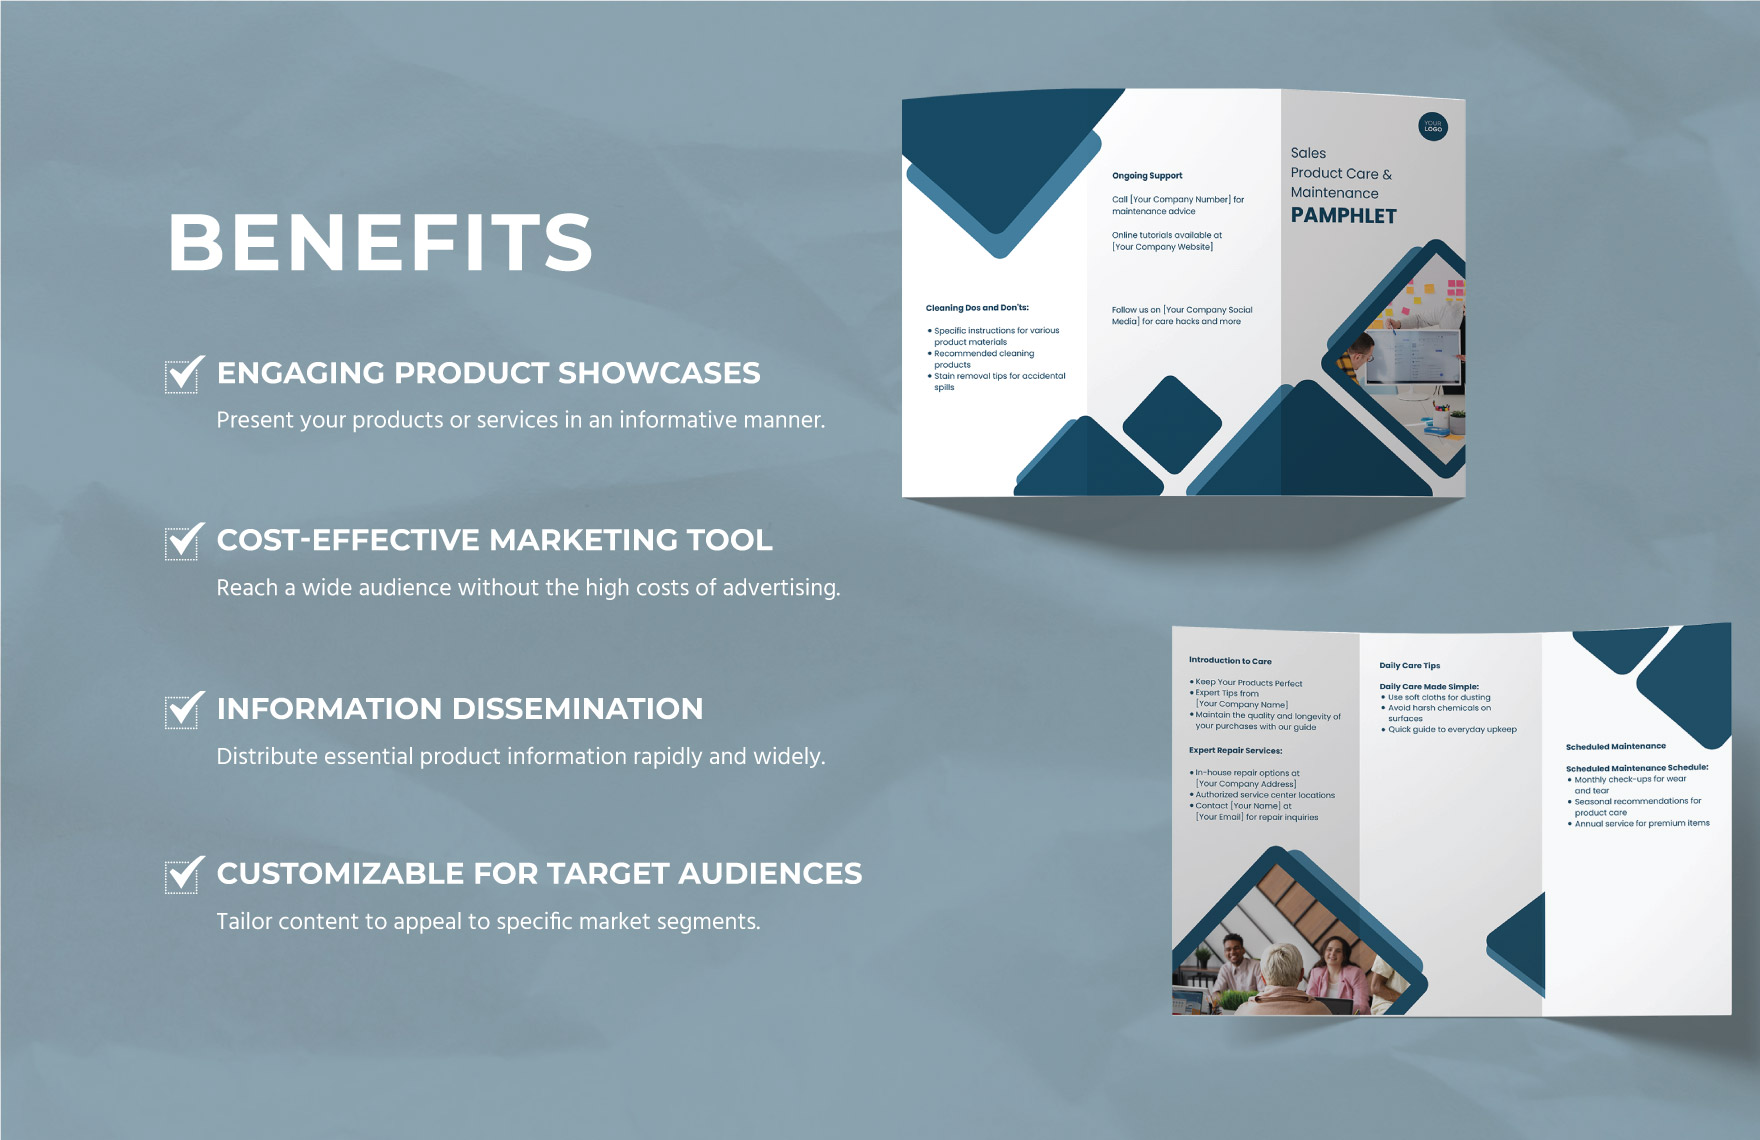 Sales Product Care and Maintenance Pamphlet Template